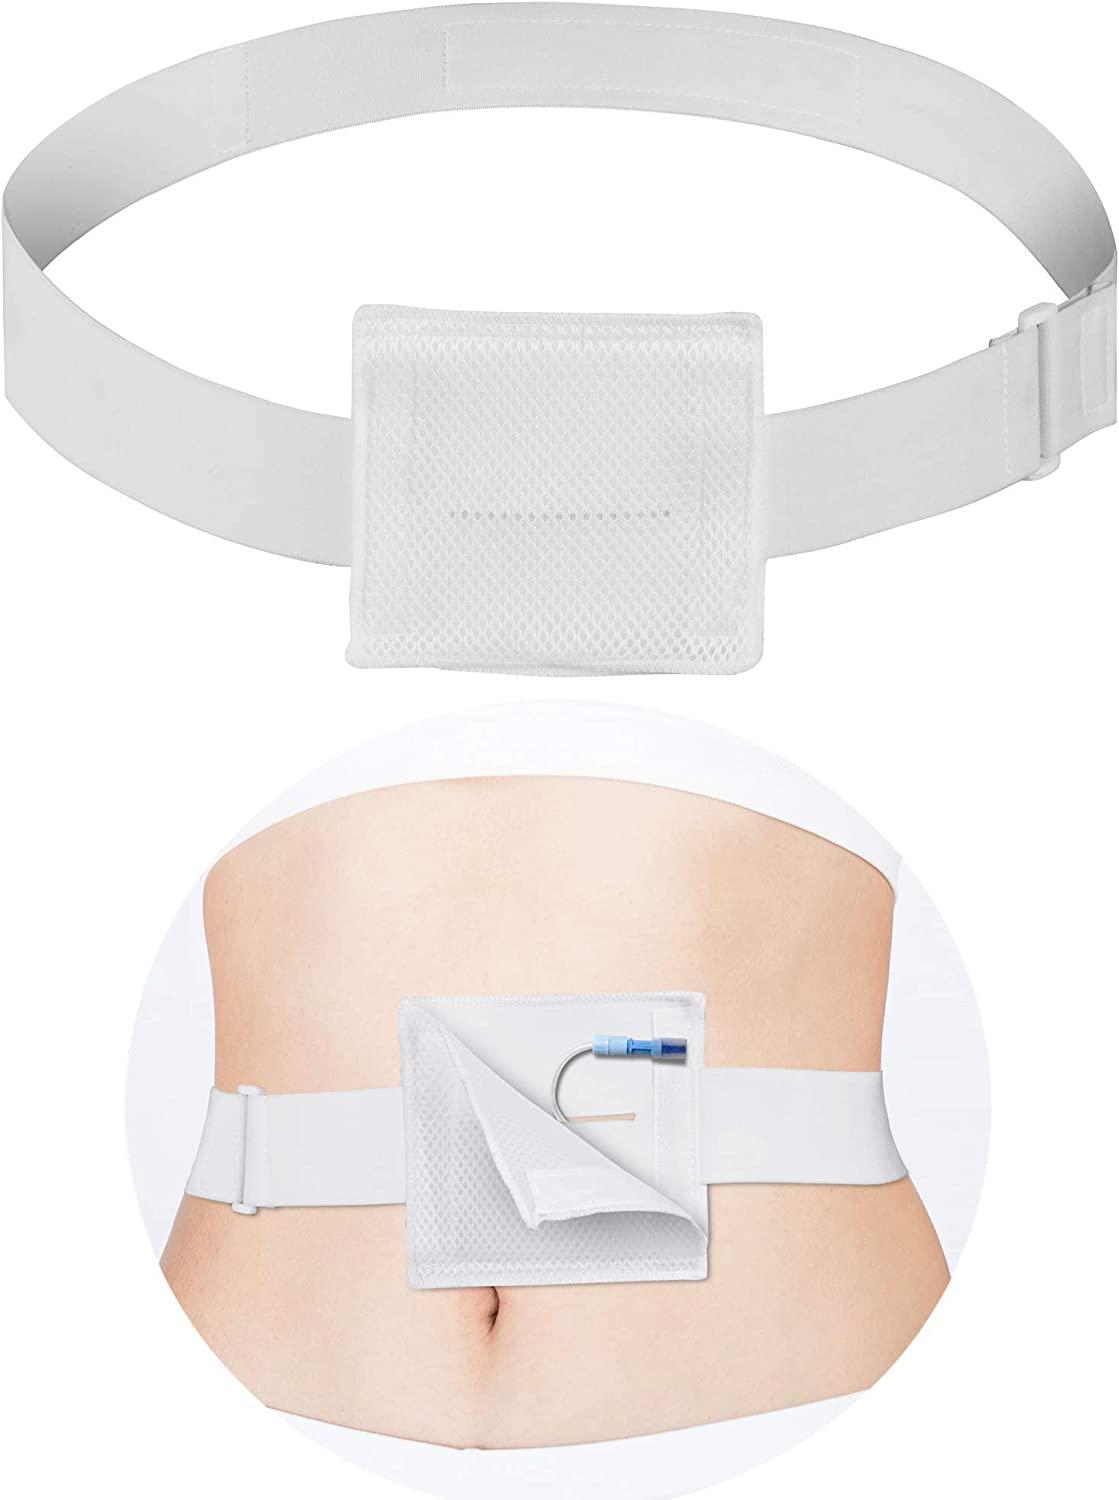 Hola Health PD Catheter Belt Peritoneal Dialysis Abdominal Waist Band Pouch Holder Accessories for Secure Transfer Set Peg G Stomach Feeding Tube